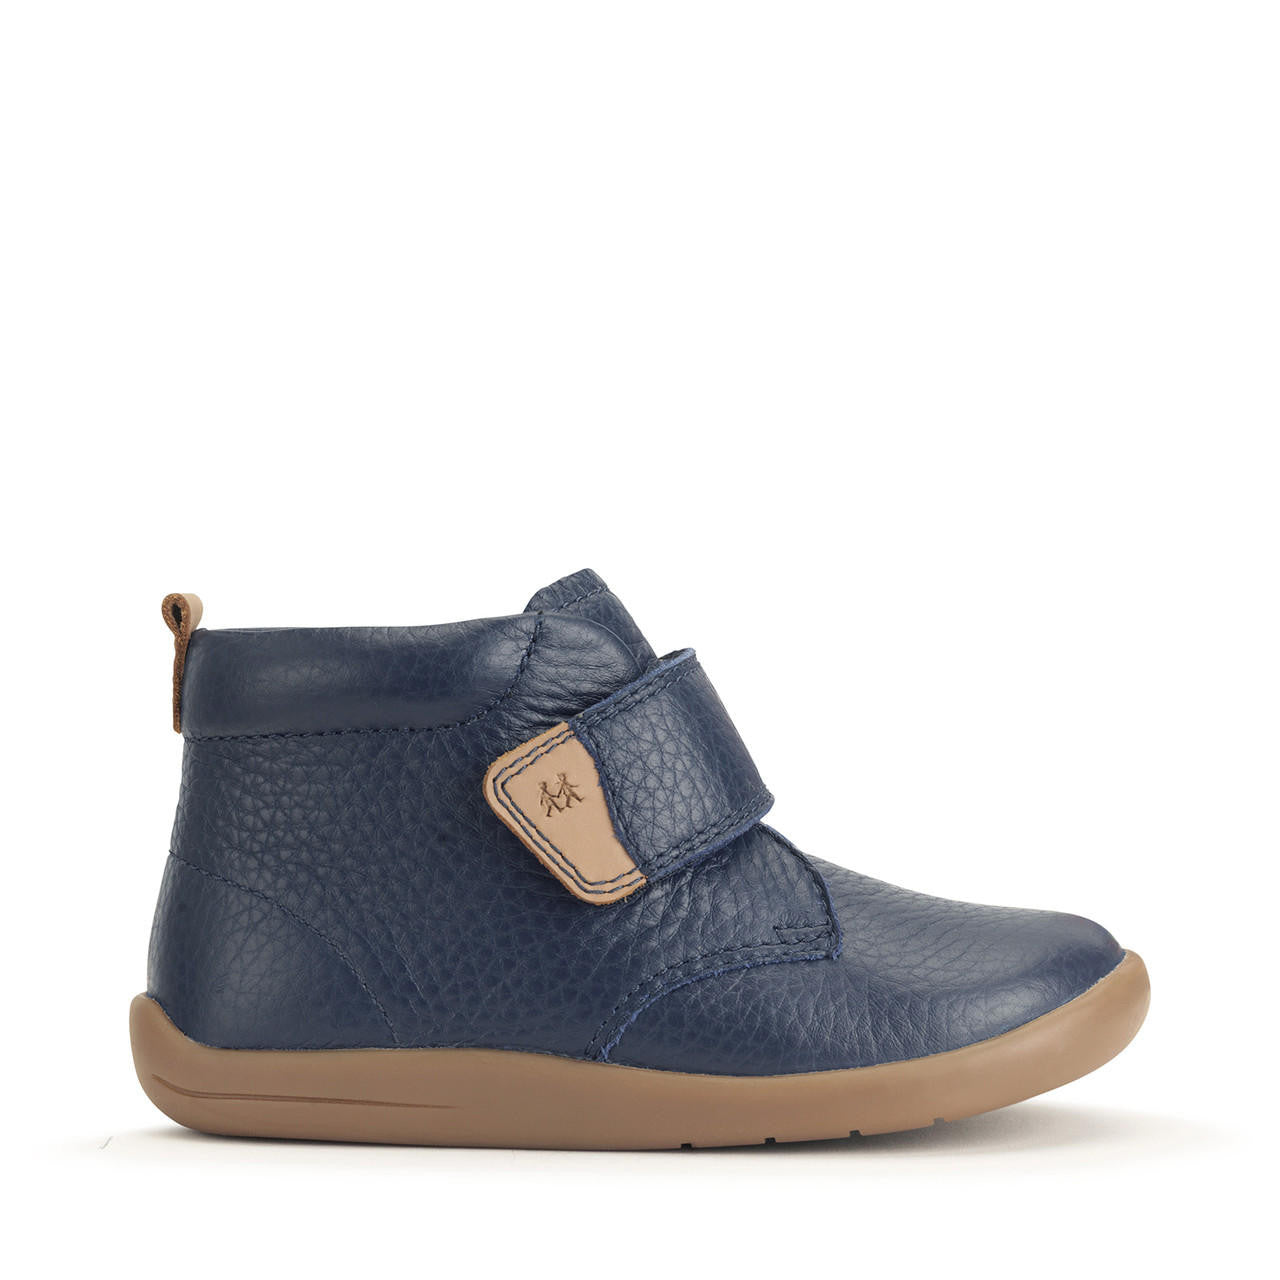 A boys ankle boot by Start-Rite, style Totter, in navy leather with light tan trim and sole unit. Velcro fastening. Right side view.